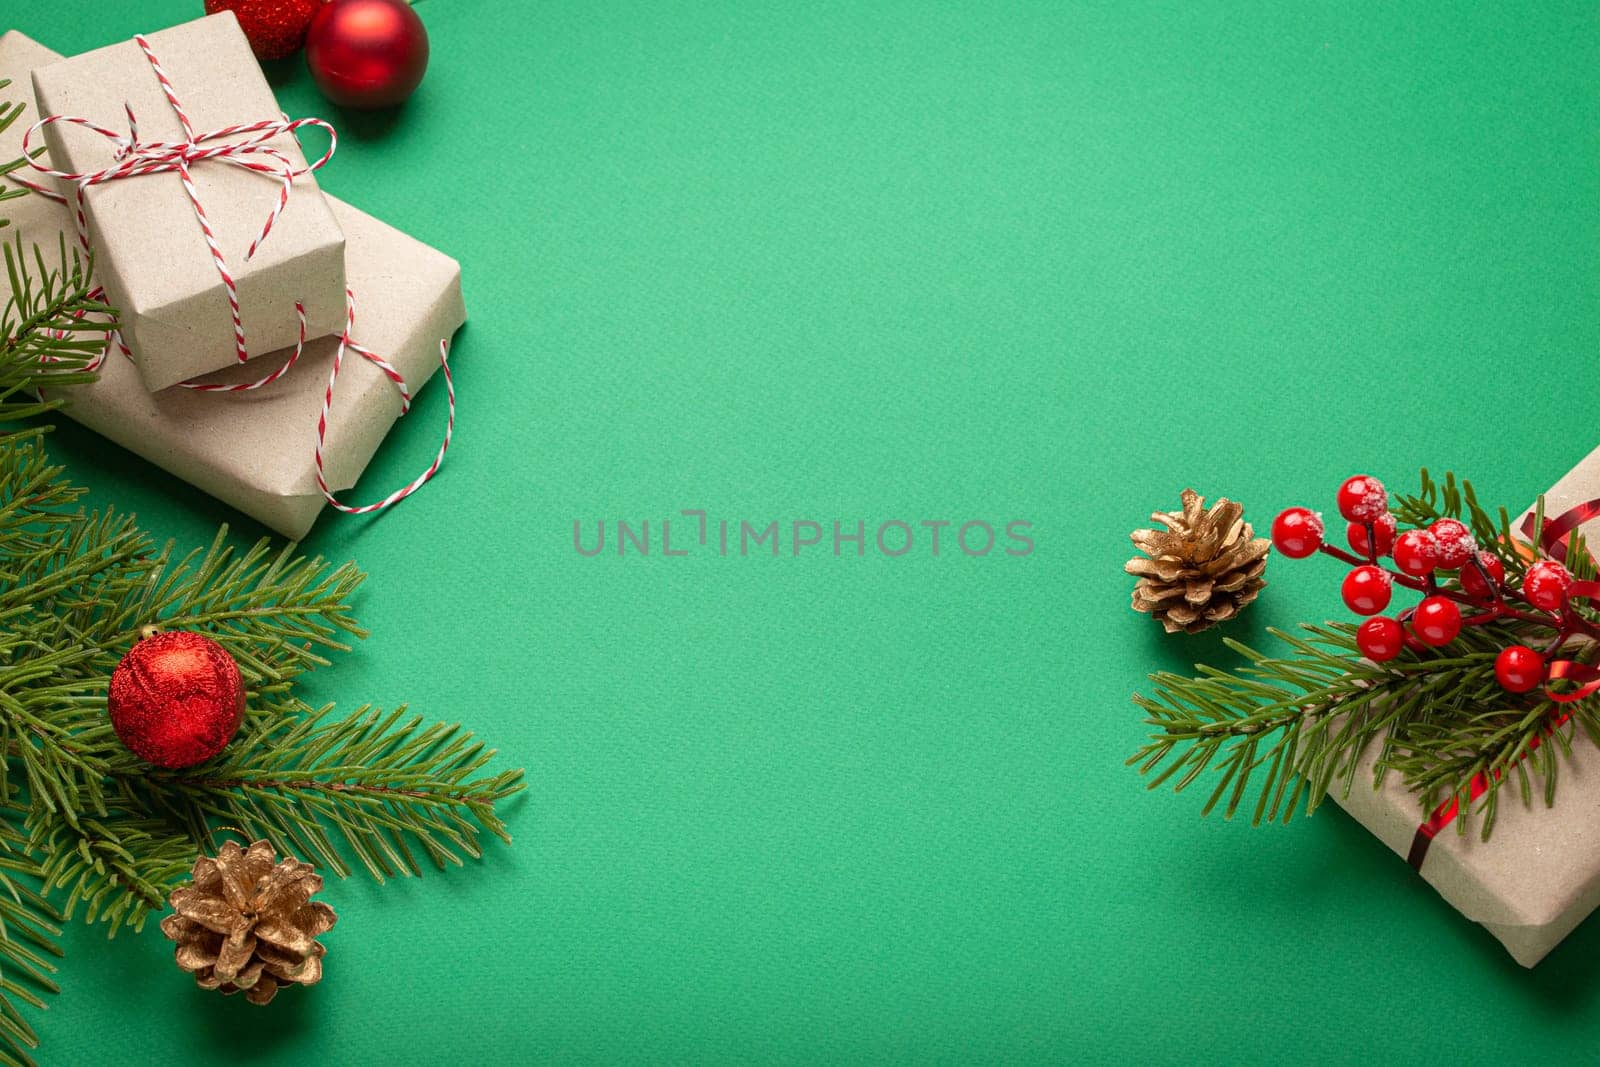 Christmas or New Year celebration green paper festive background with decoration fir tree, present boxes, cones, berries, sparkly red balls. Space for text. by its_al_dente